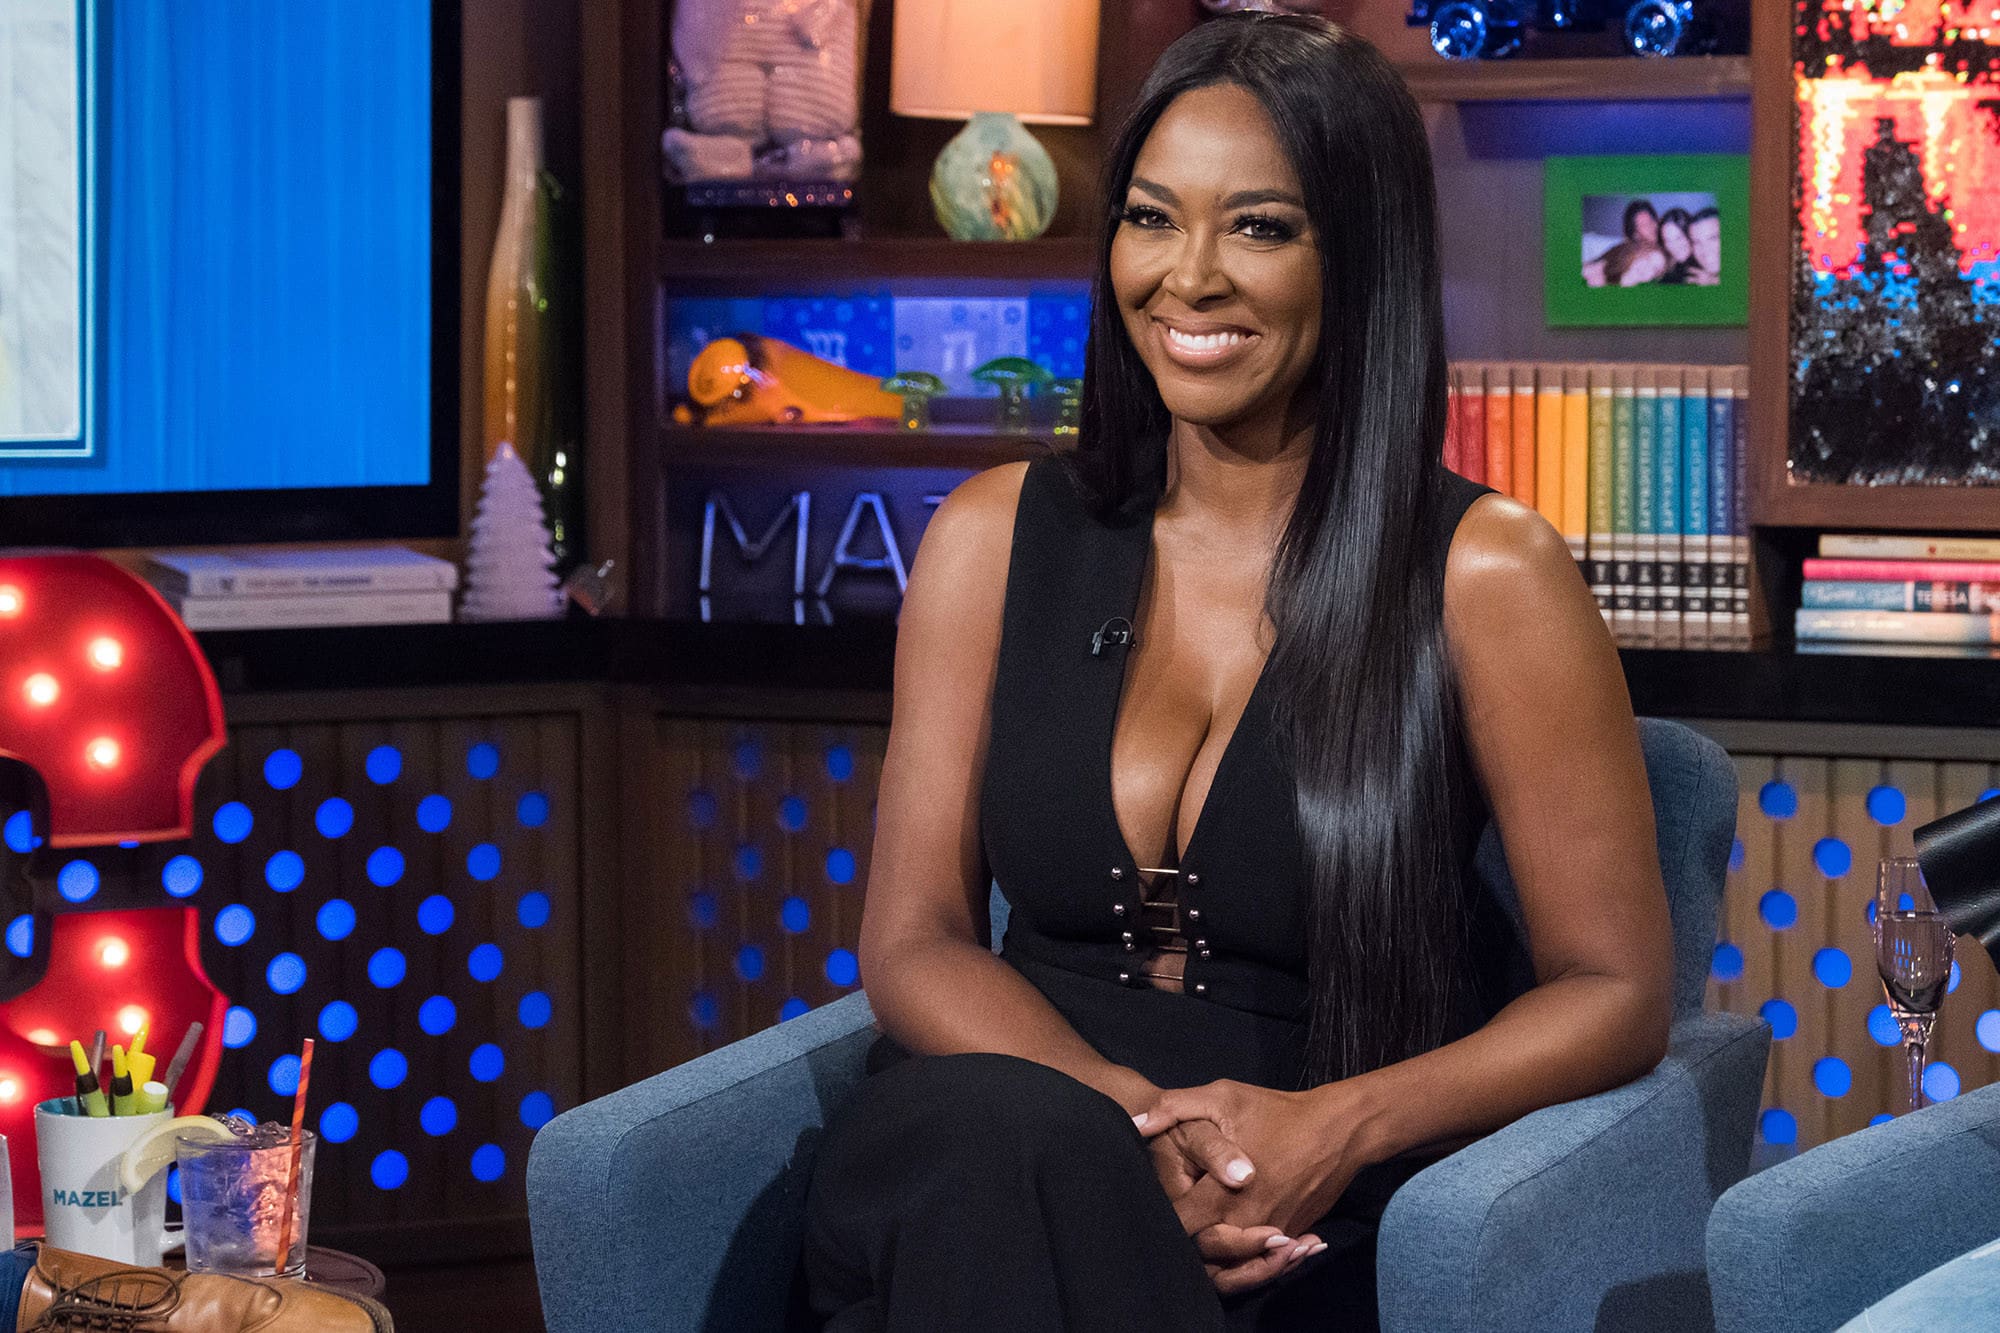 Kenya Moore Is Officially Back On The RHOA Series, And Bravo TV Confirms - Check Out A Photo Featuring Kenya And Her Peach